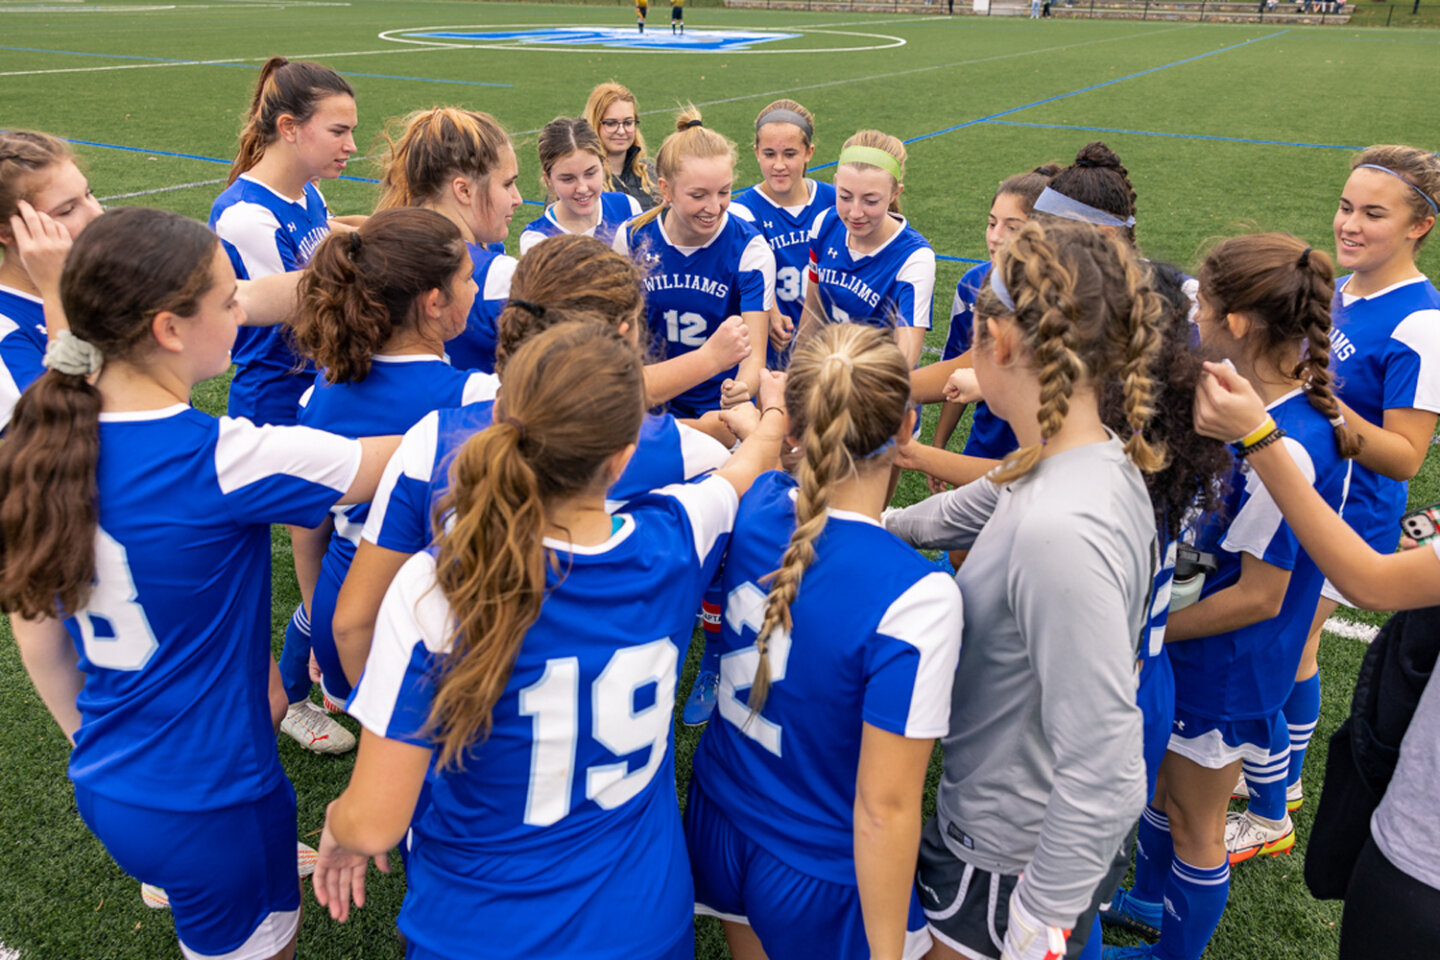 Girls soccer players in a huddle